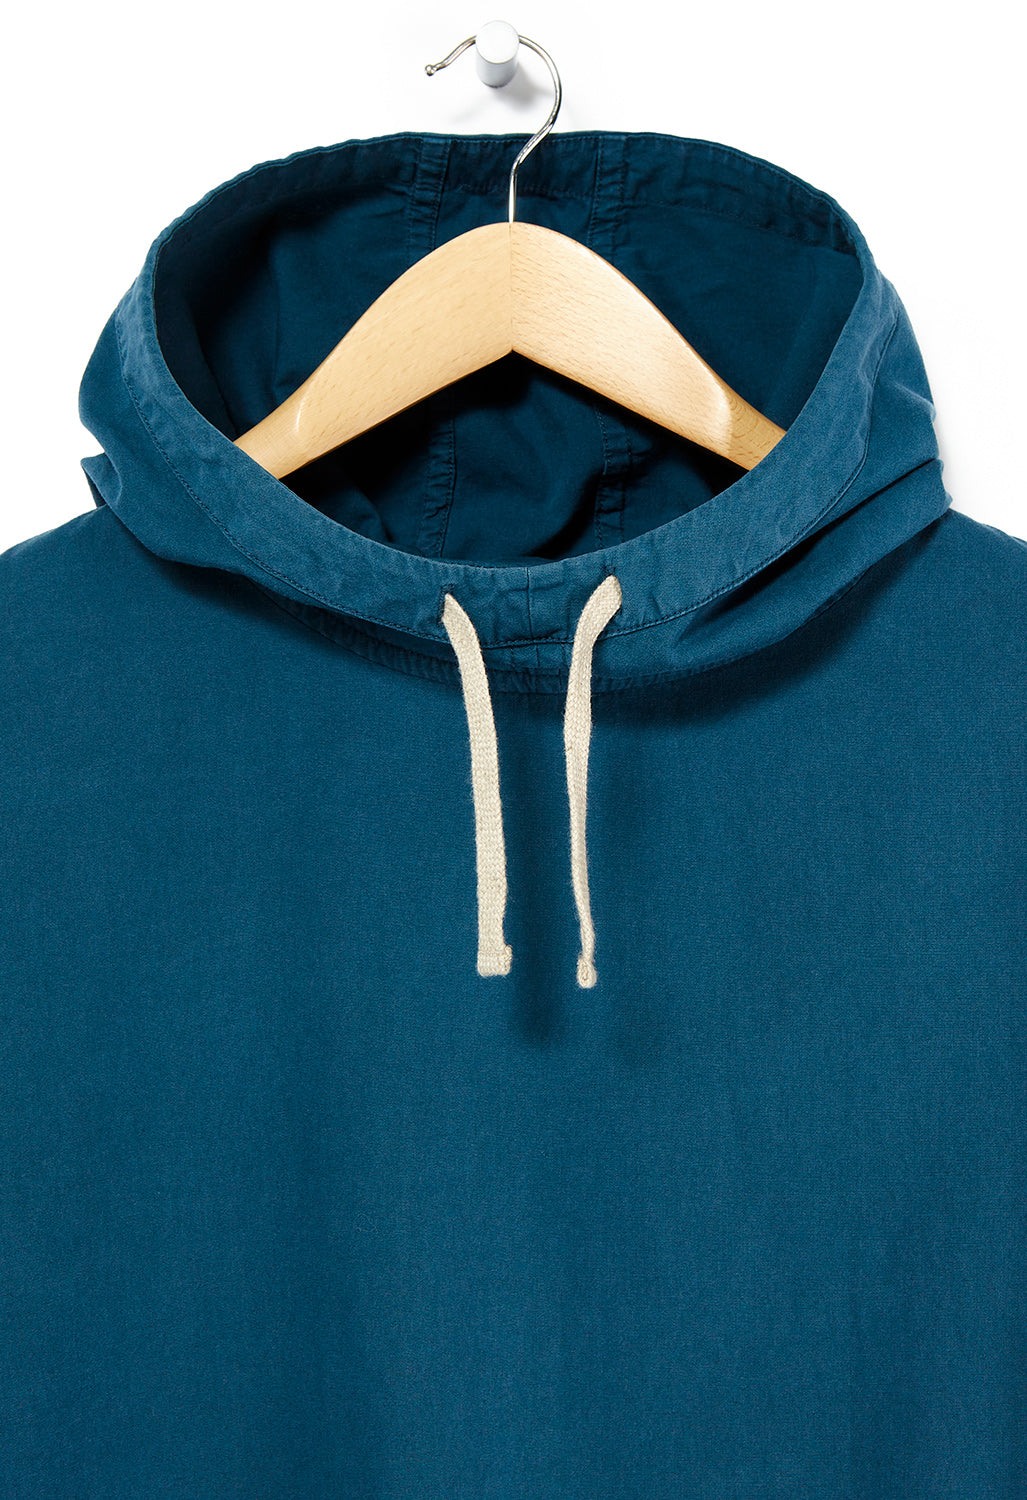 Snow Peak Natural-Dyed Recycled Cotton Parka Jacket - Blue